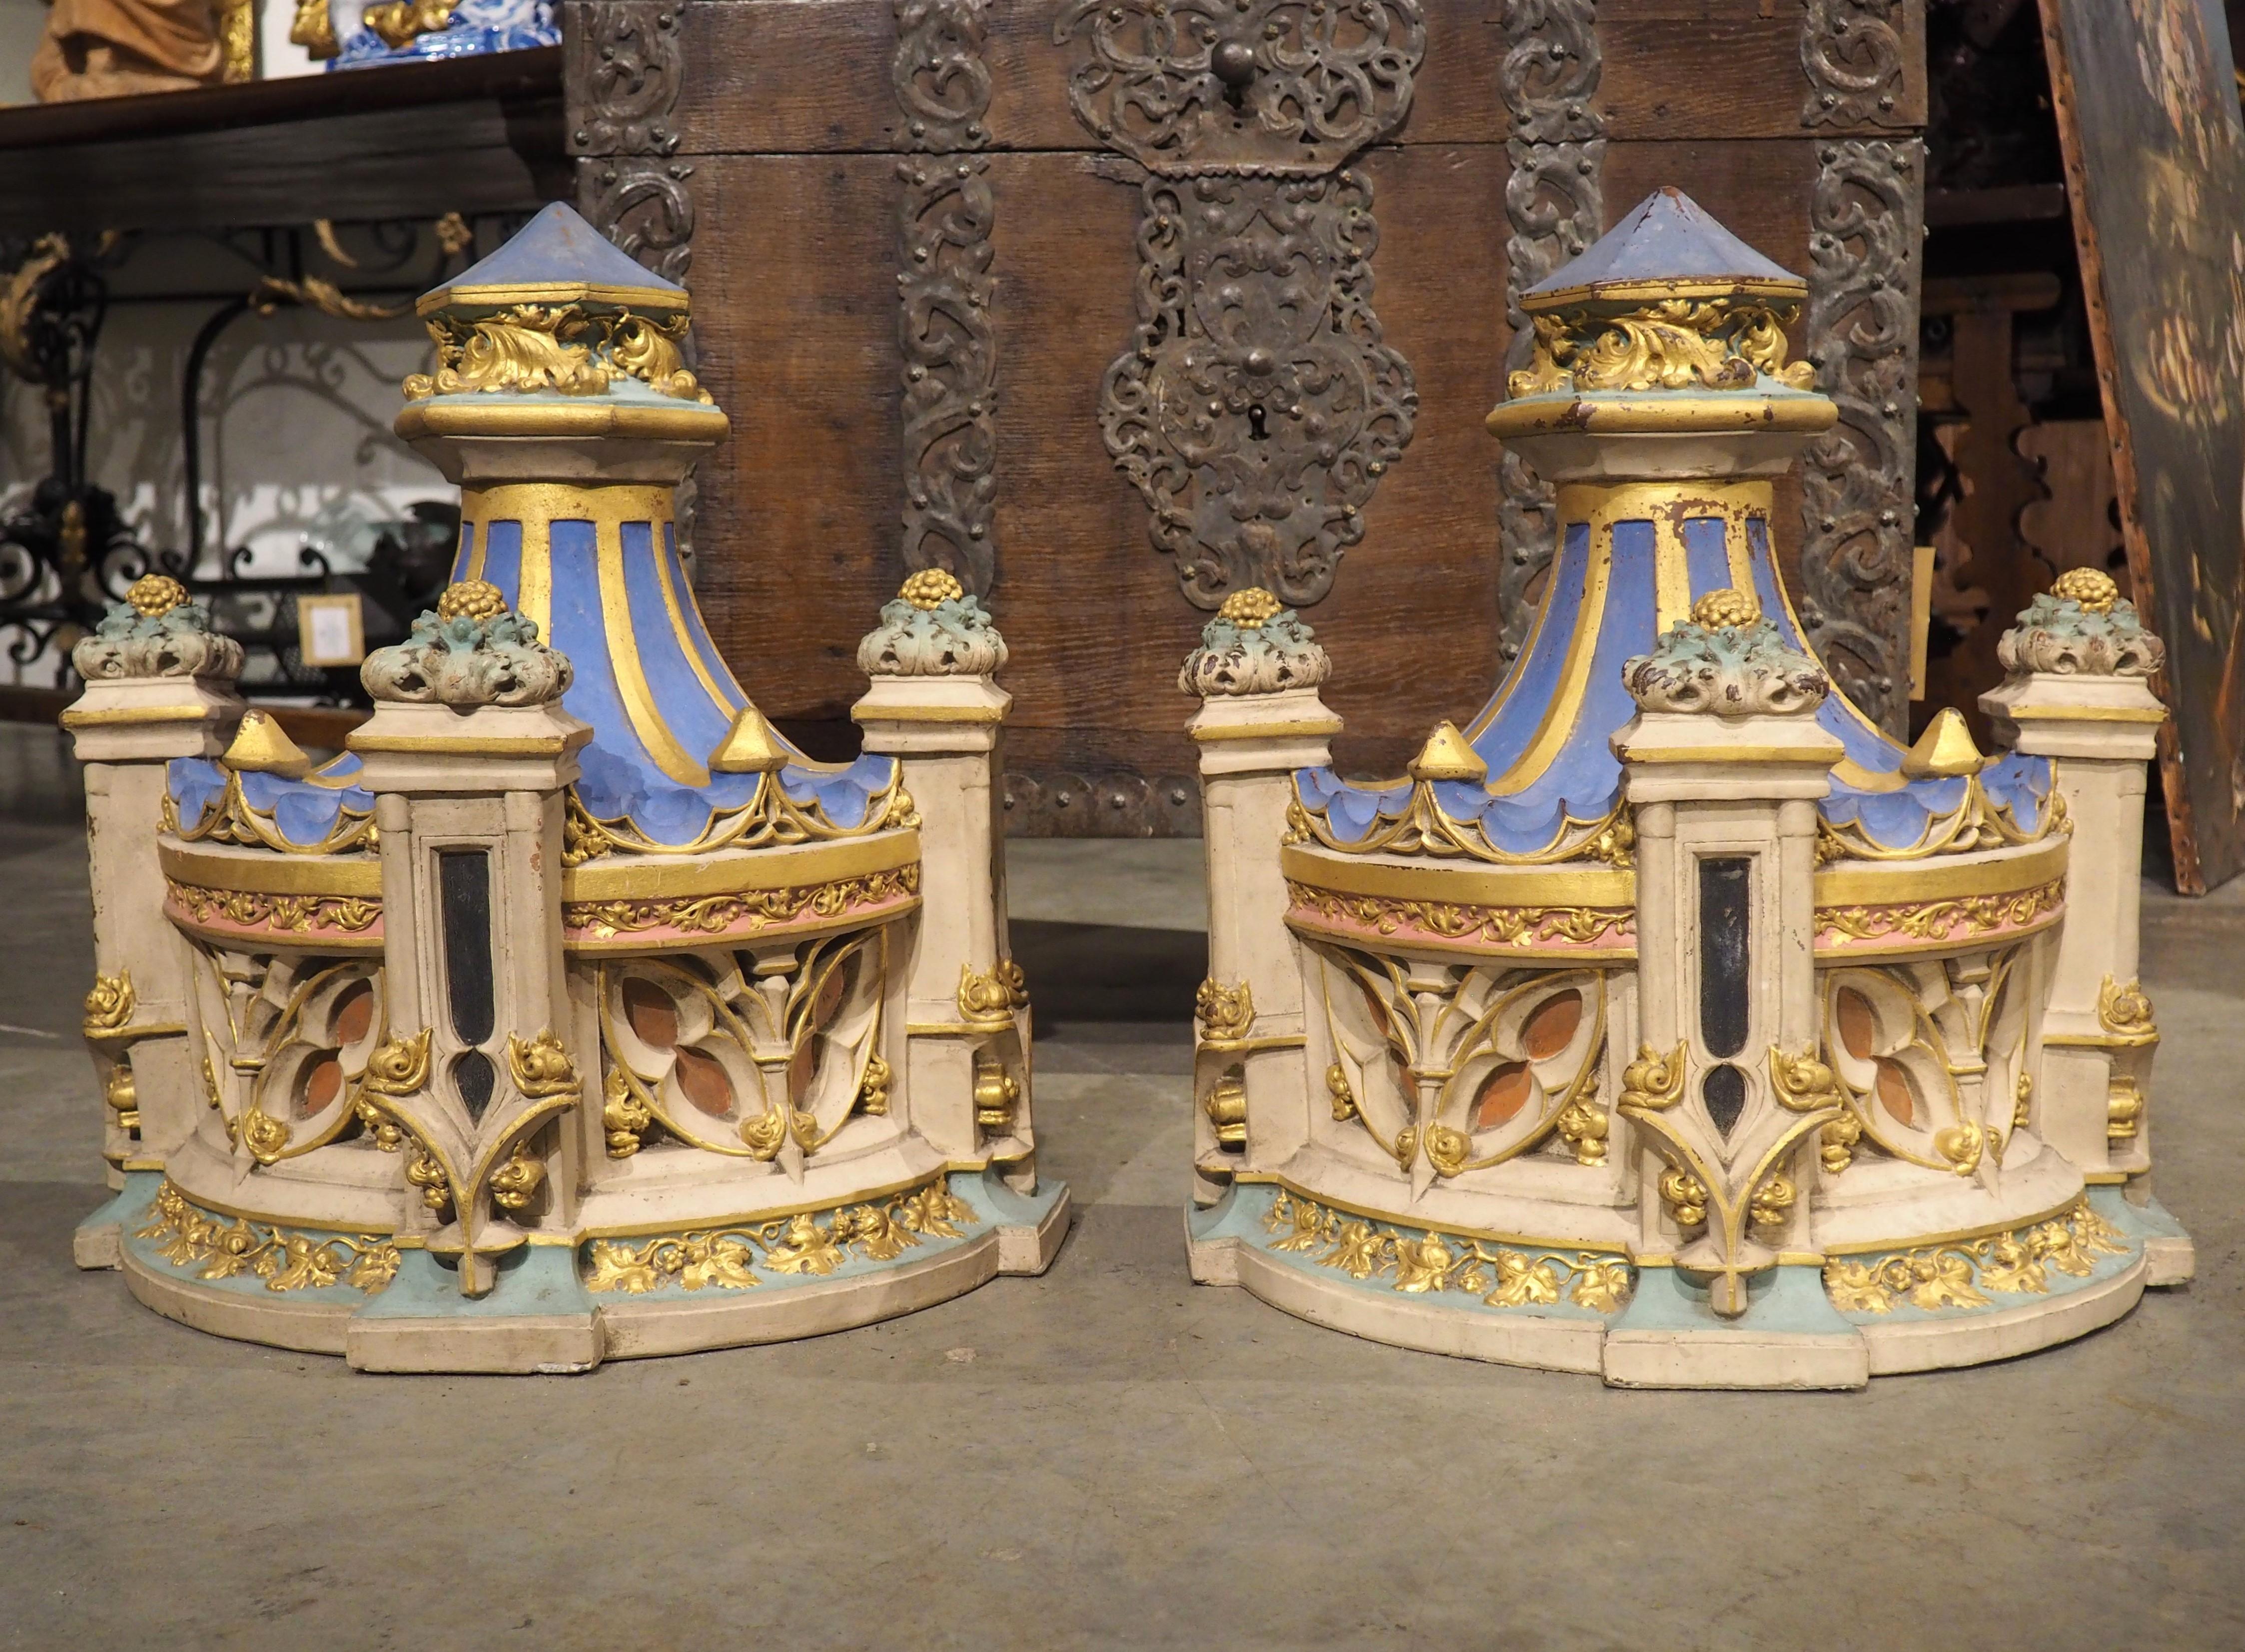 Pair of Polychrome Terra Cotta Architecturals or Wall Consoles, France, C. 1850 For Sale 10